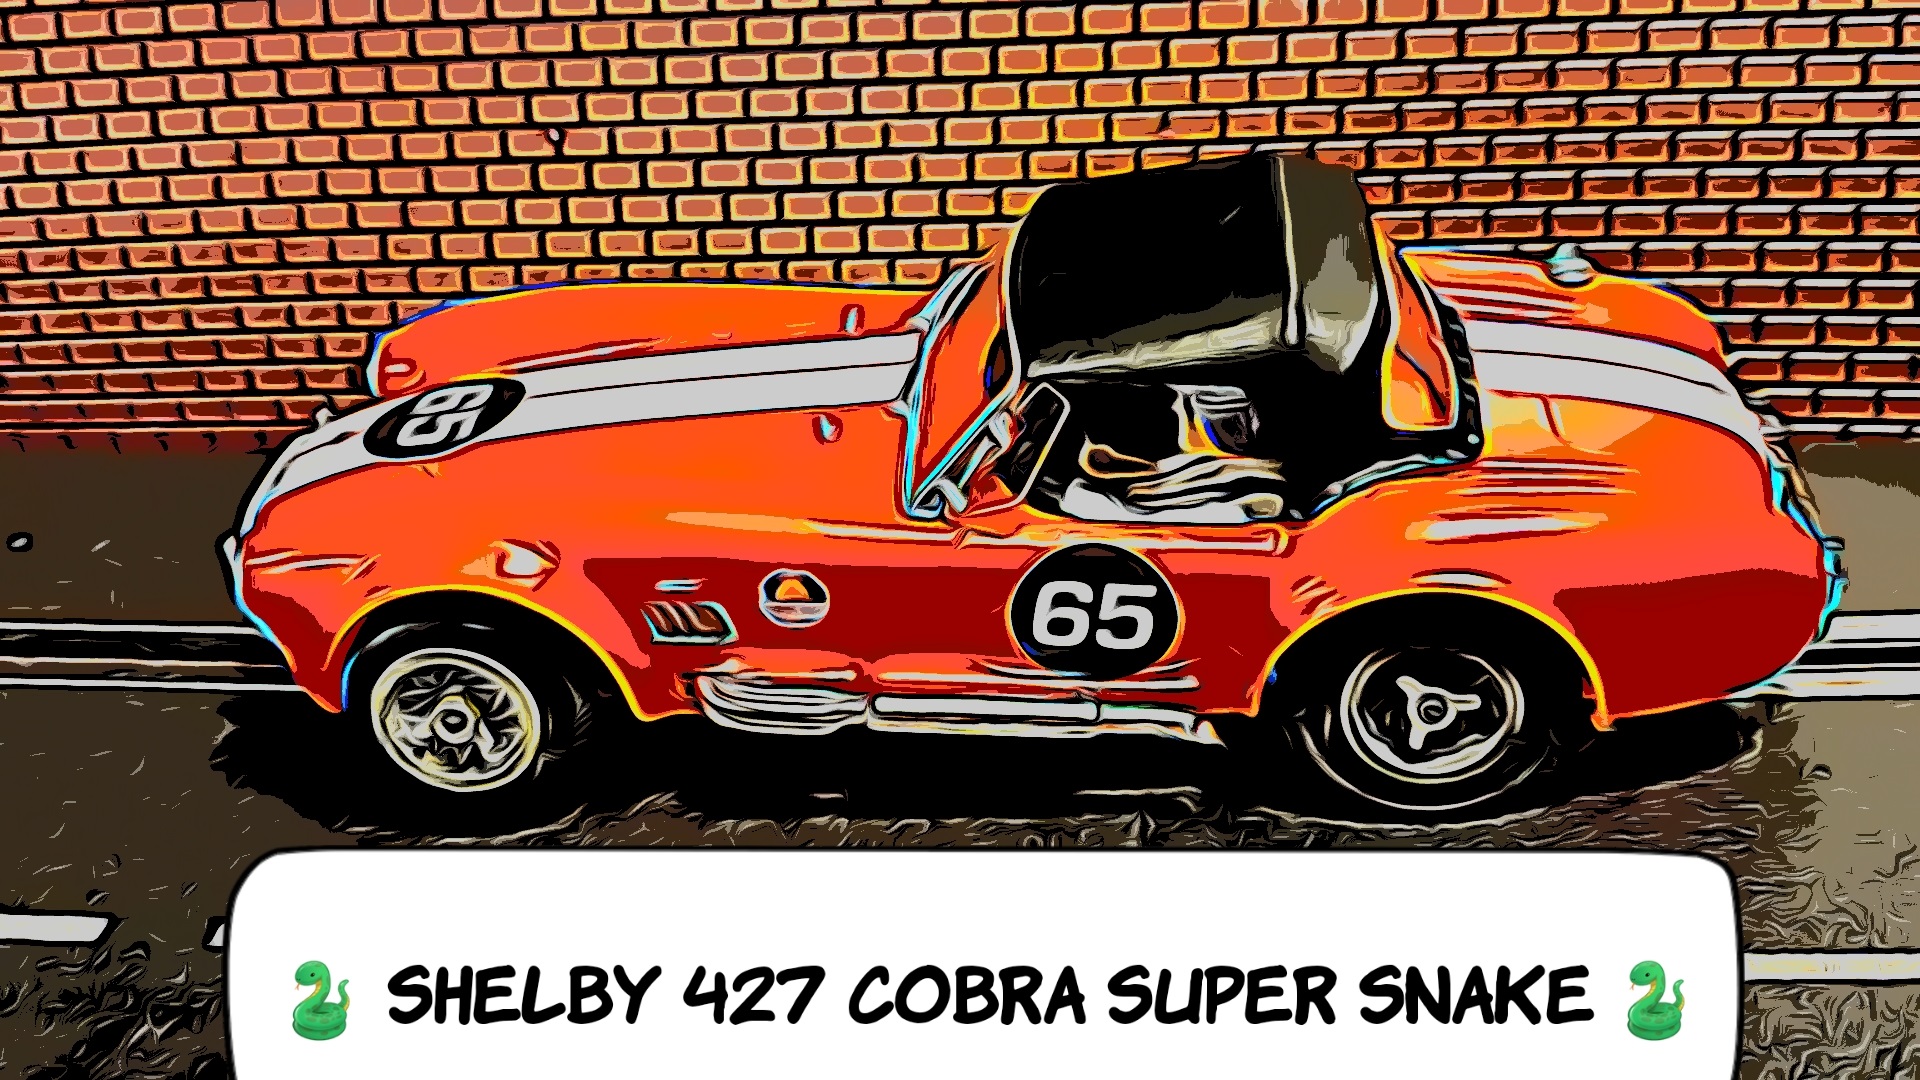 * SALE * COX Shelby Cobra 427 🐍 Slot Car 1:24 Scale Car 65 in Red with Dual Racing Stripes